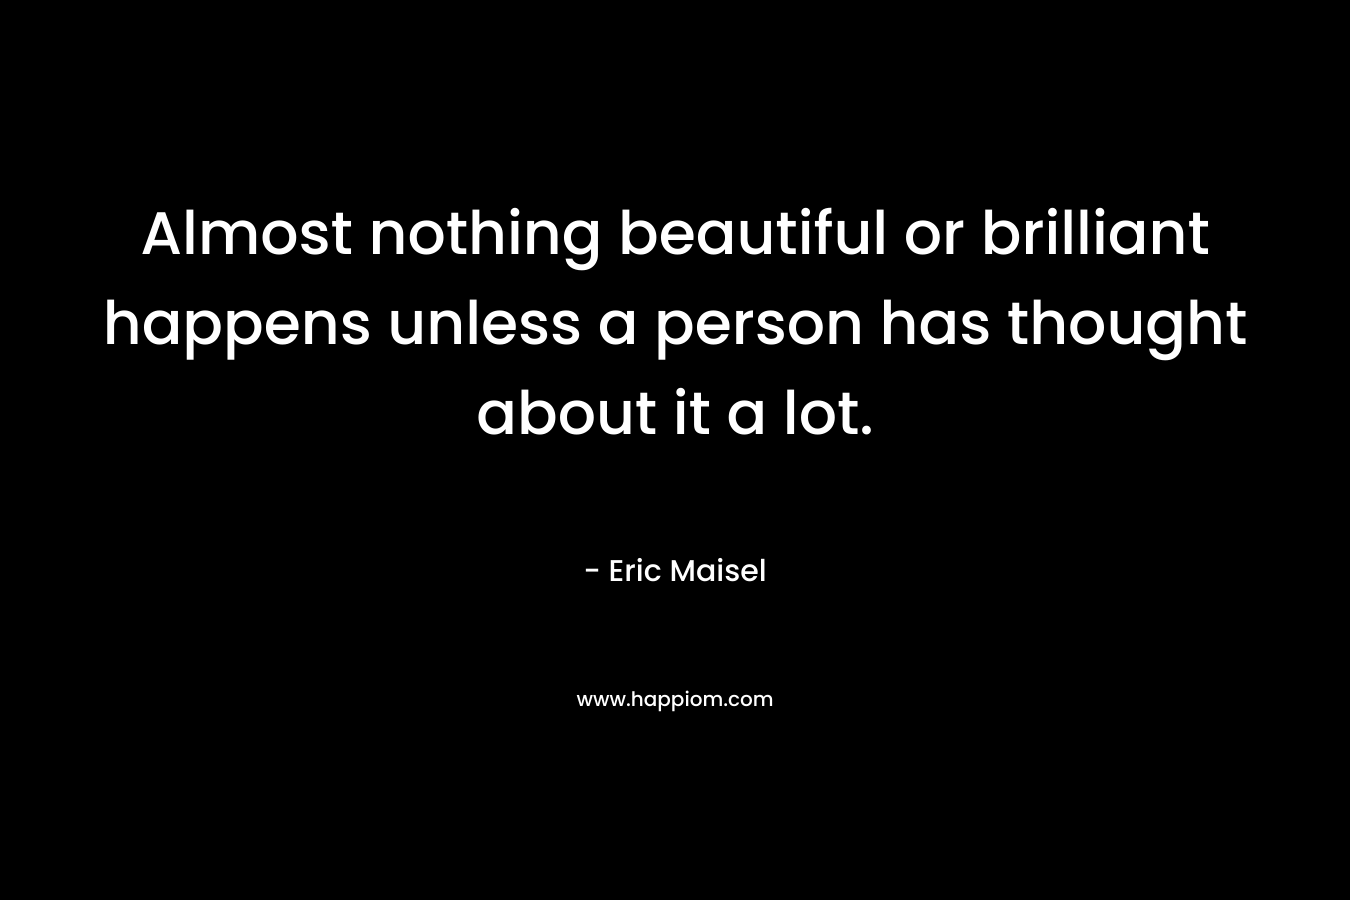 Almost nothing beautiful or brilliant happens unless a person has thought about it a lot. – Eric Maisel